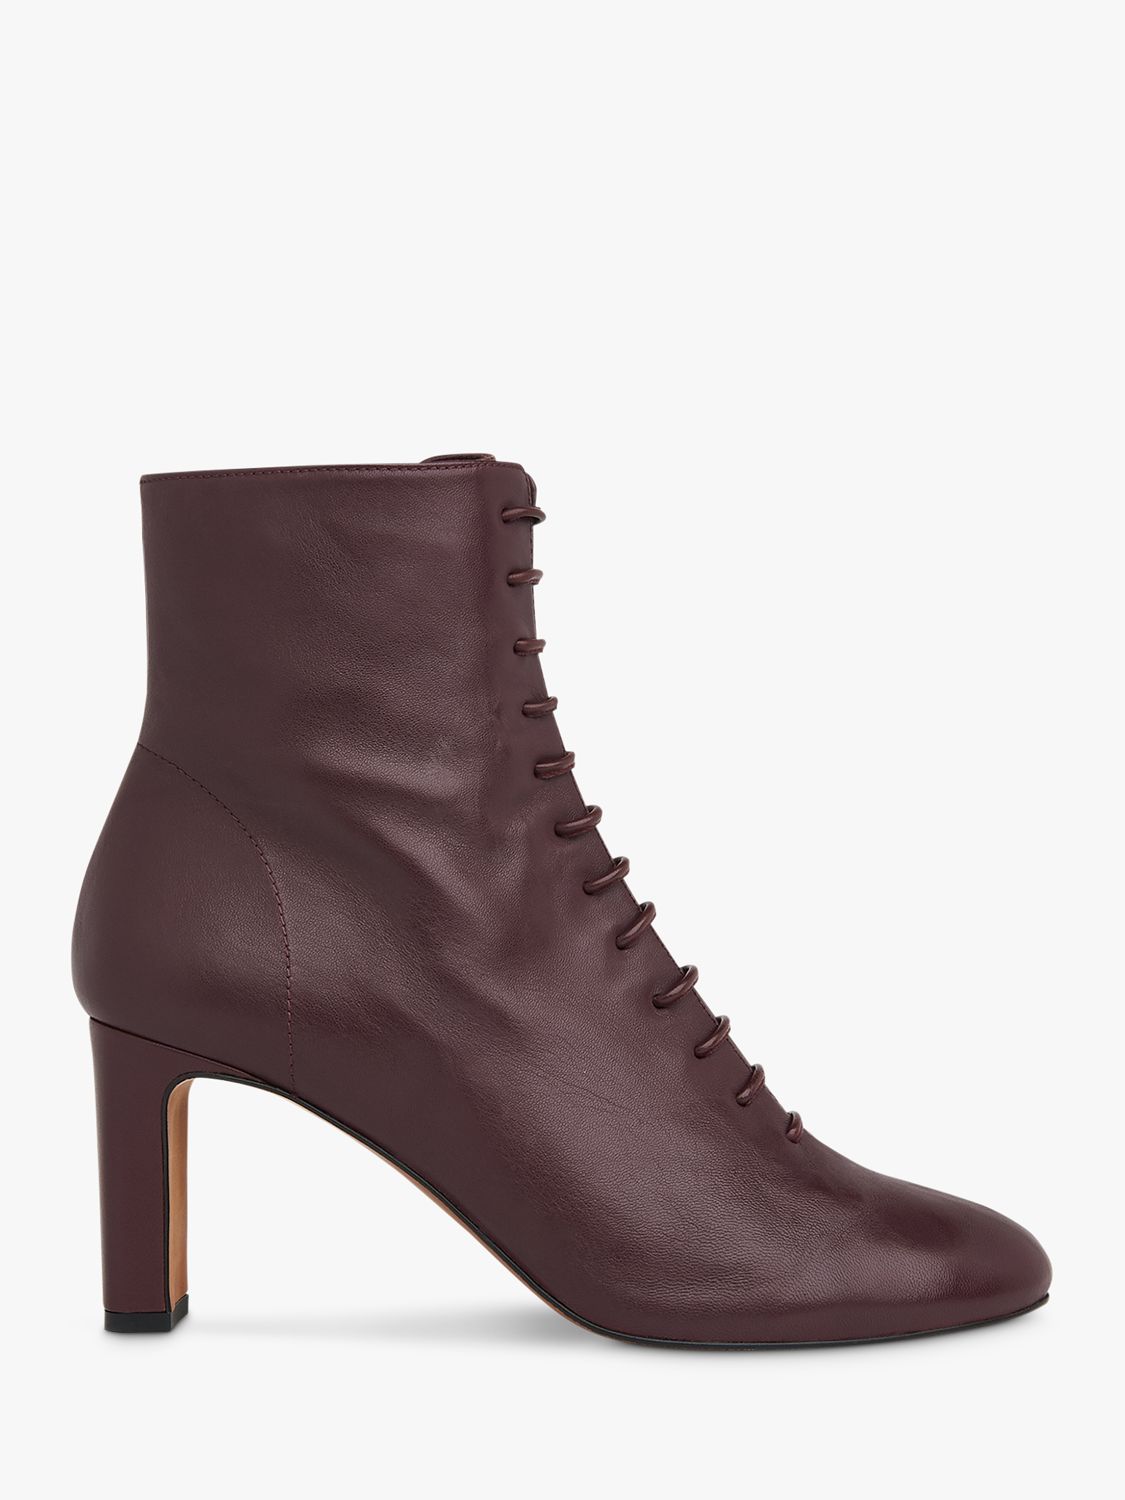 Whistles Dahlia Leather Lace Up Ankle Boots, Plum